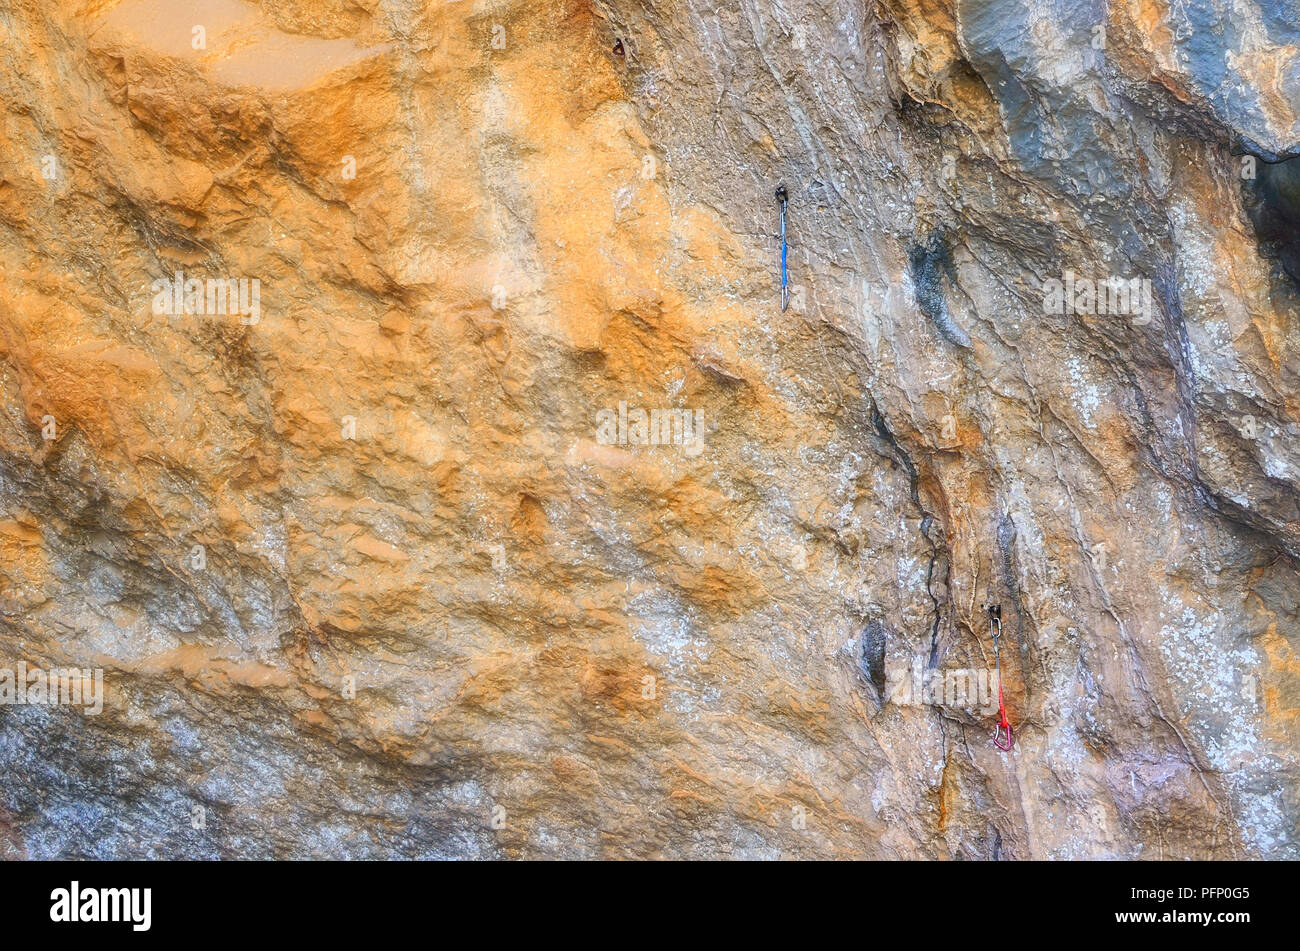 Natural climbing wall at the hillside of a rocky mountain. Carabiners ready to be used by the climbers. Soft background. Shaded spot area Stock Photo